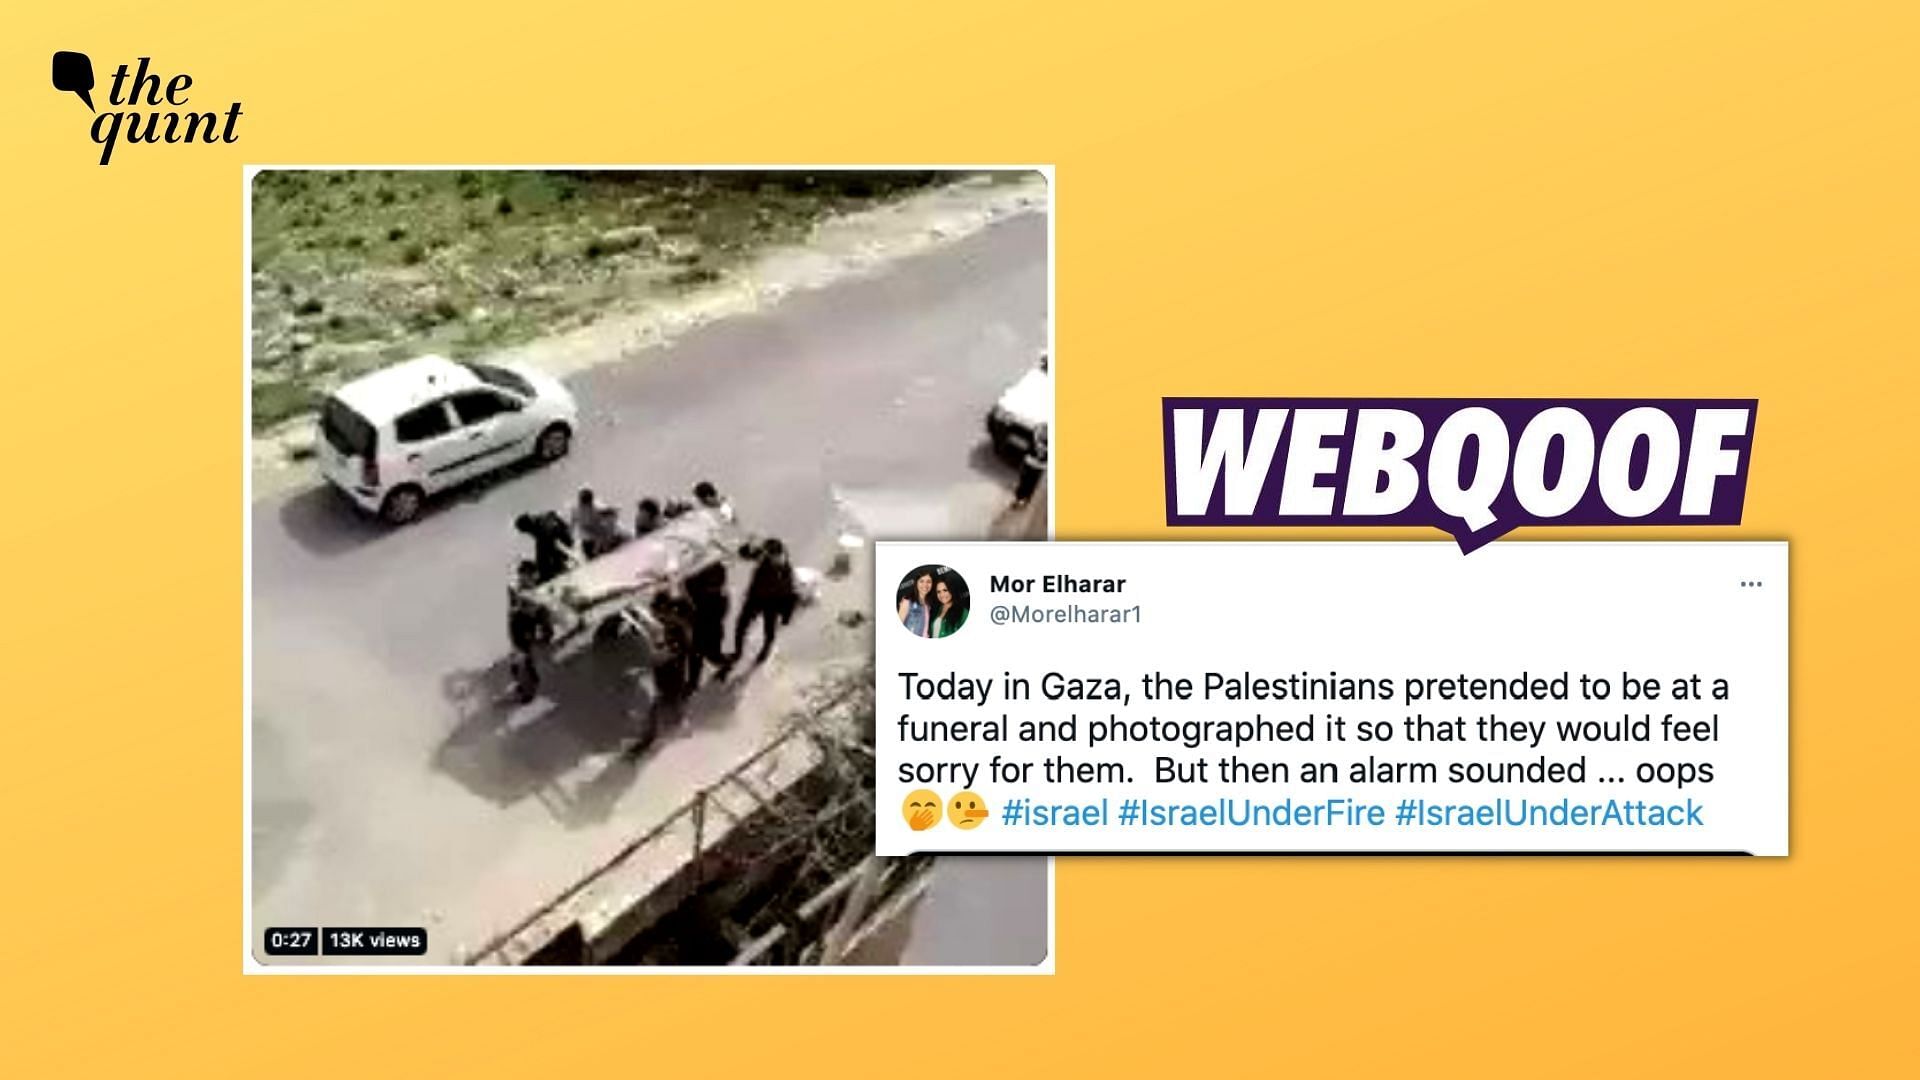 Amid the ongoing <a href="https://www.thequint.com/news/world/united-states-iran-iraq-condemn-violence-by-israeli-jerusalem-palestine-al-aqsa-mosque">conflict</a> between Israel and Palestine, an old video is doing the rounds on social media to claim that people in Palestine are faking casualties.